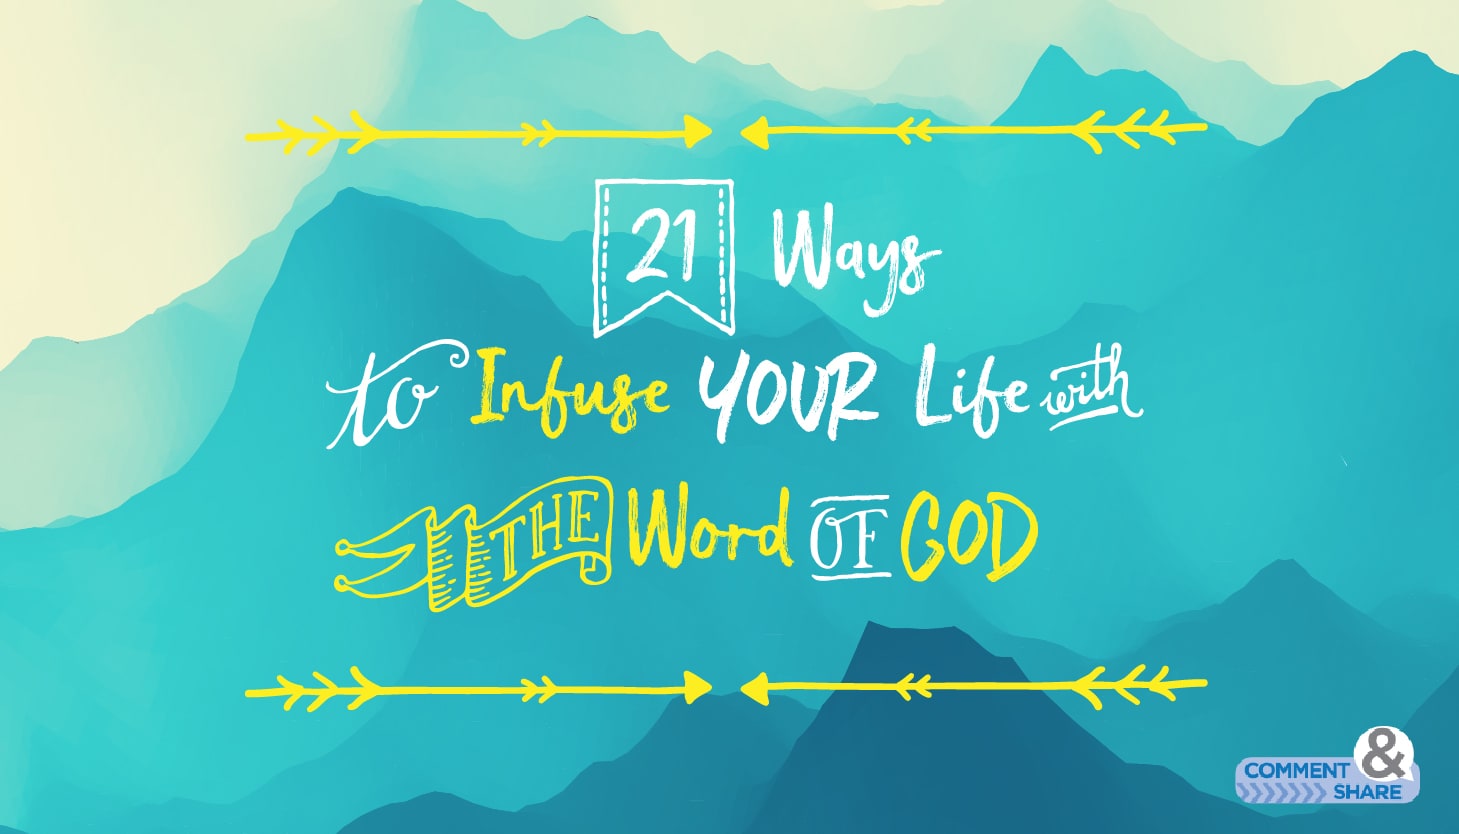 21 Ways to infuse your life with word of God